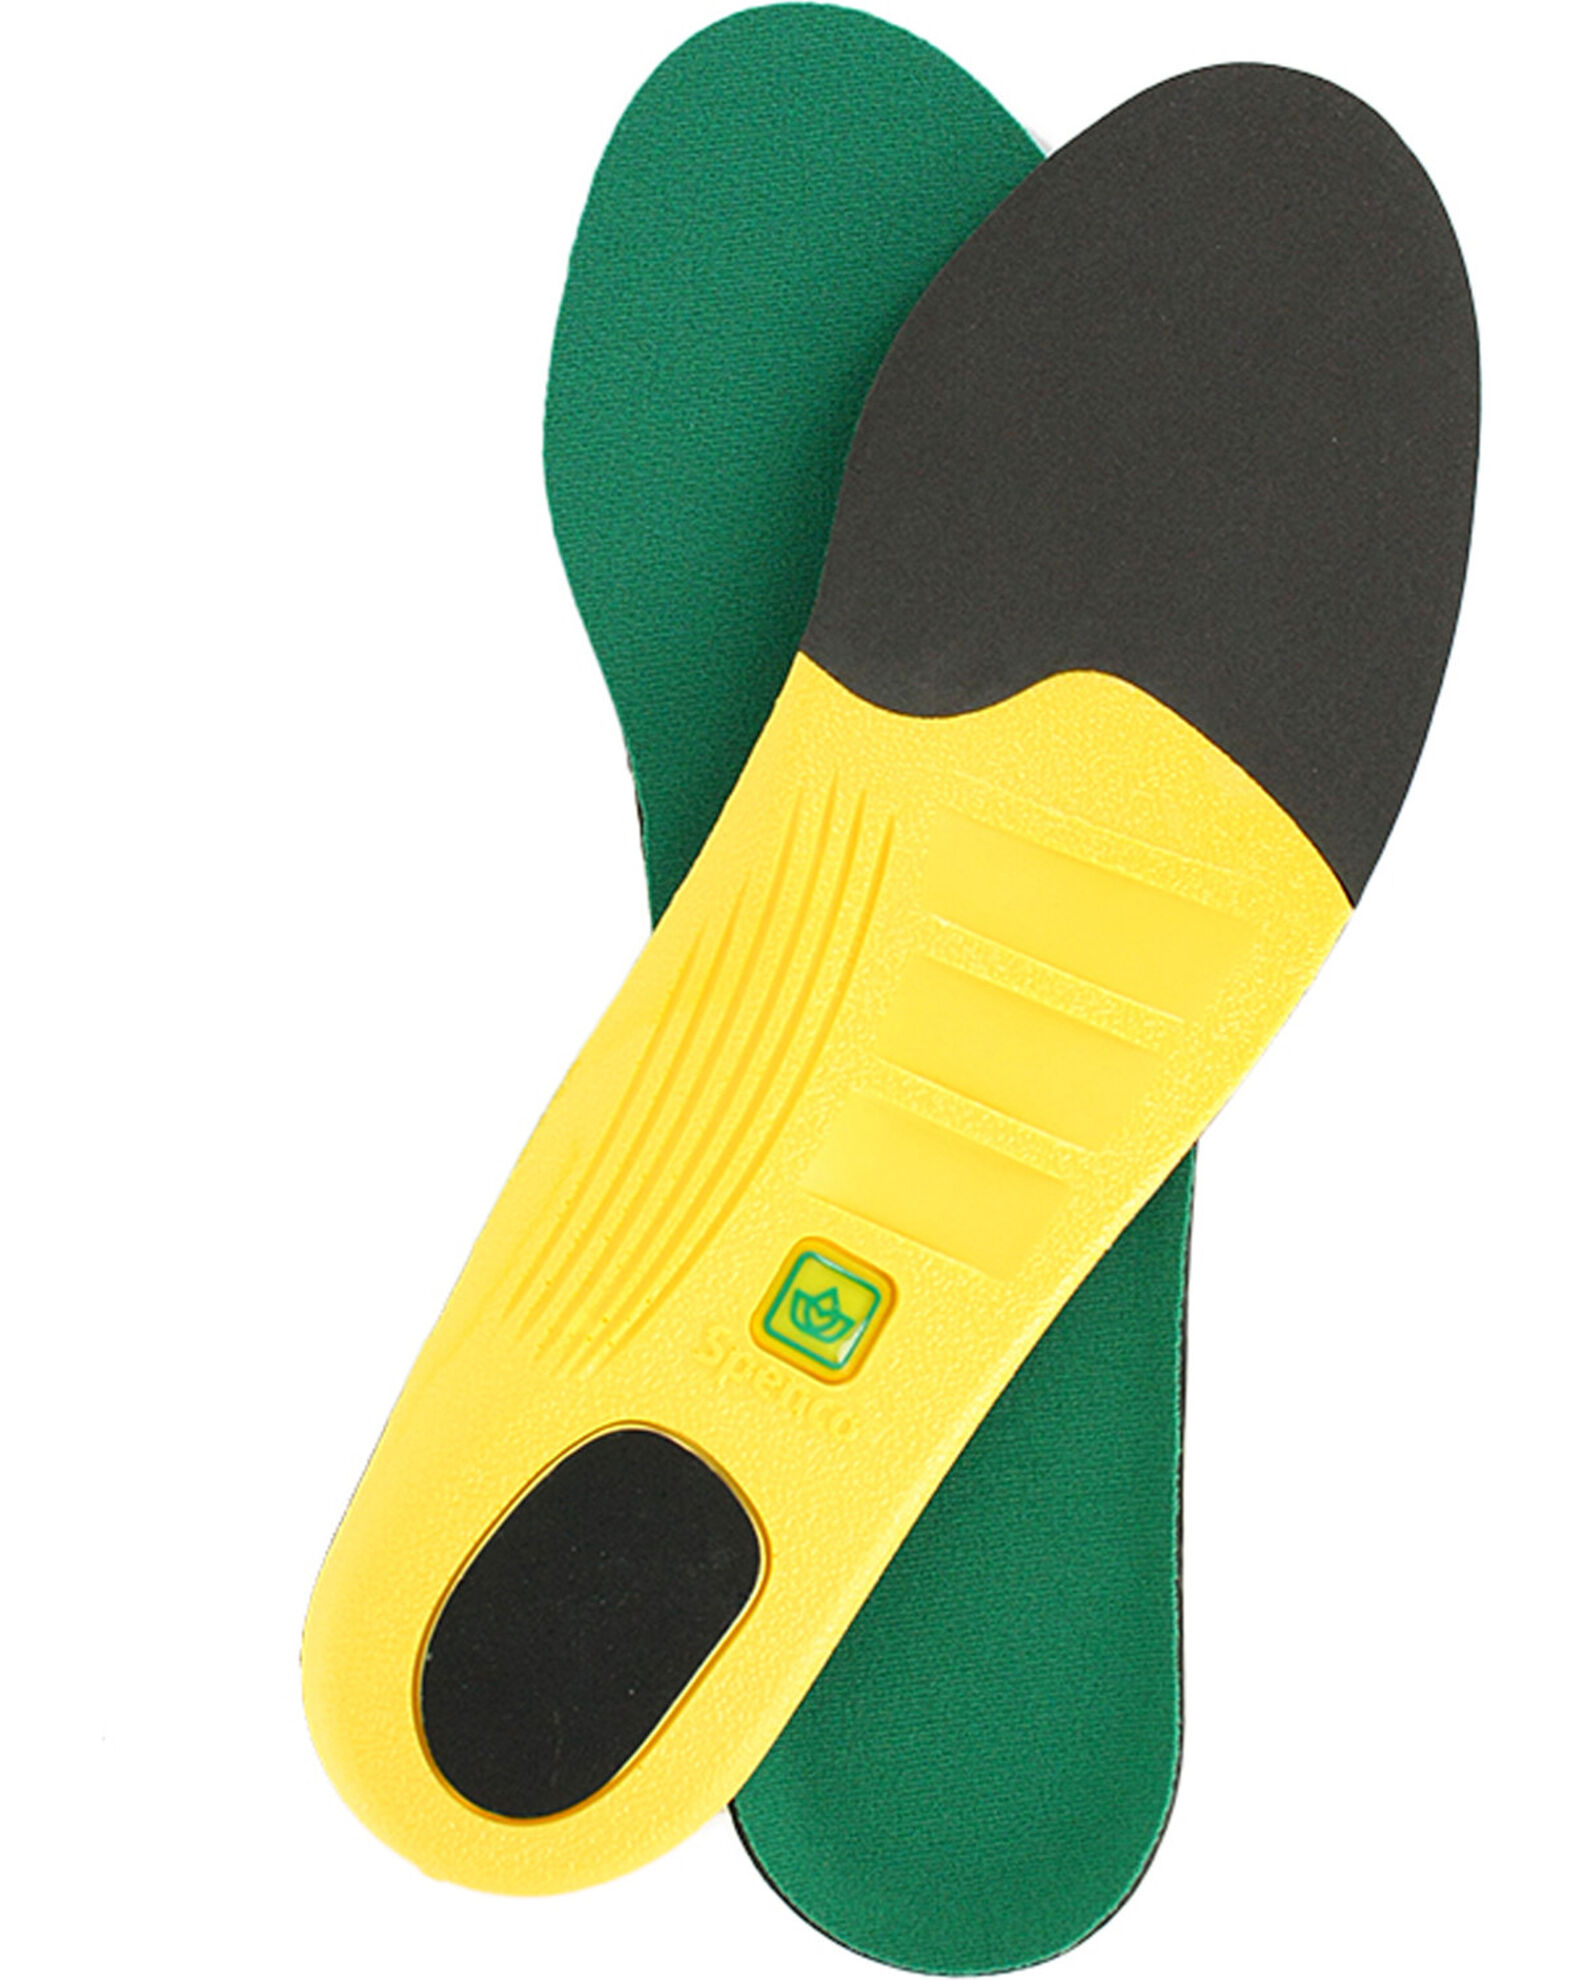 Product Name: Spenco Polysorb Heavy Duty Occupational Insoles